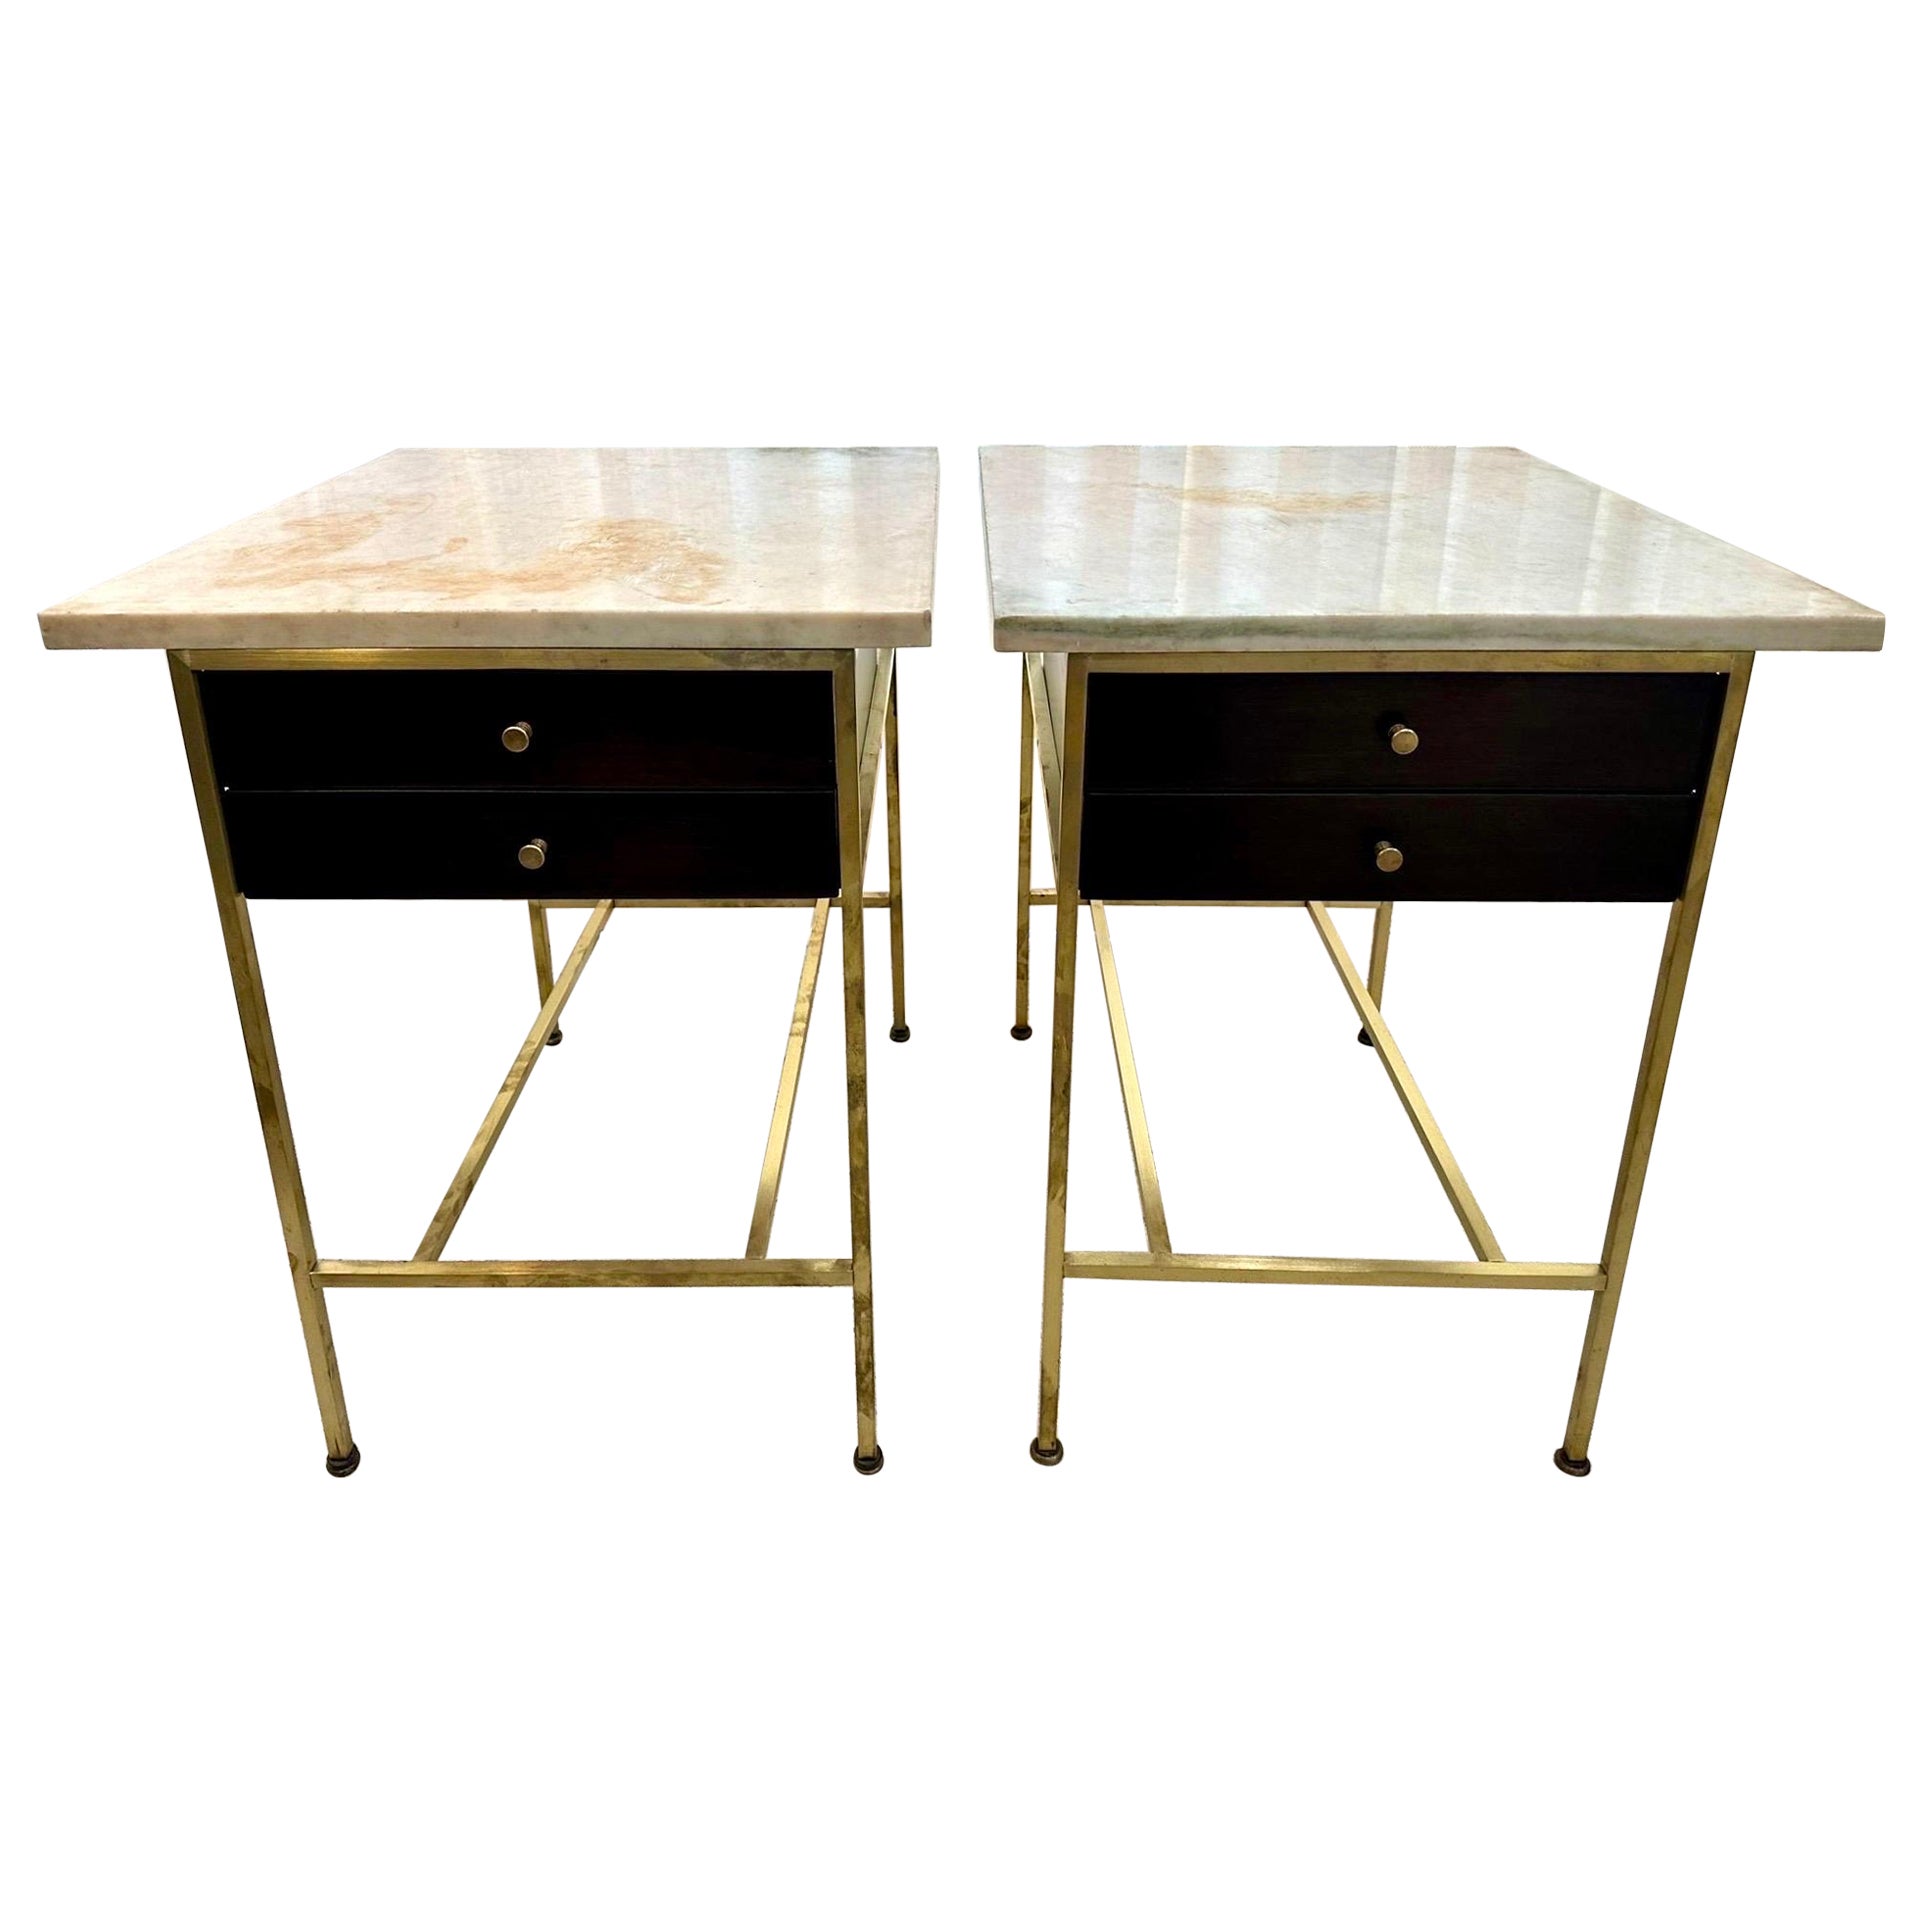 Paul McCobb Side Tables #8712 with Original Marble Tops, PAIR